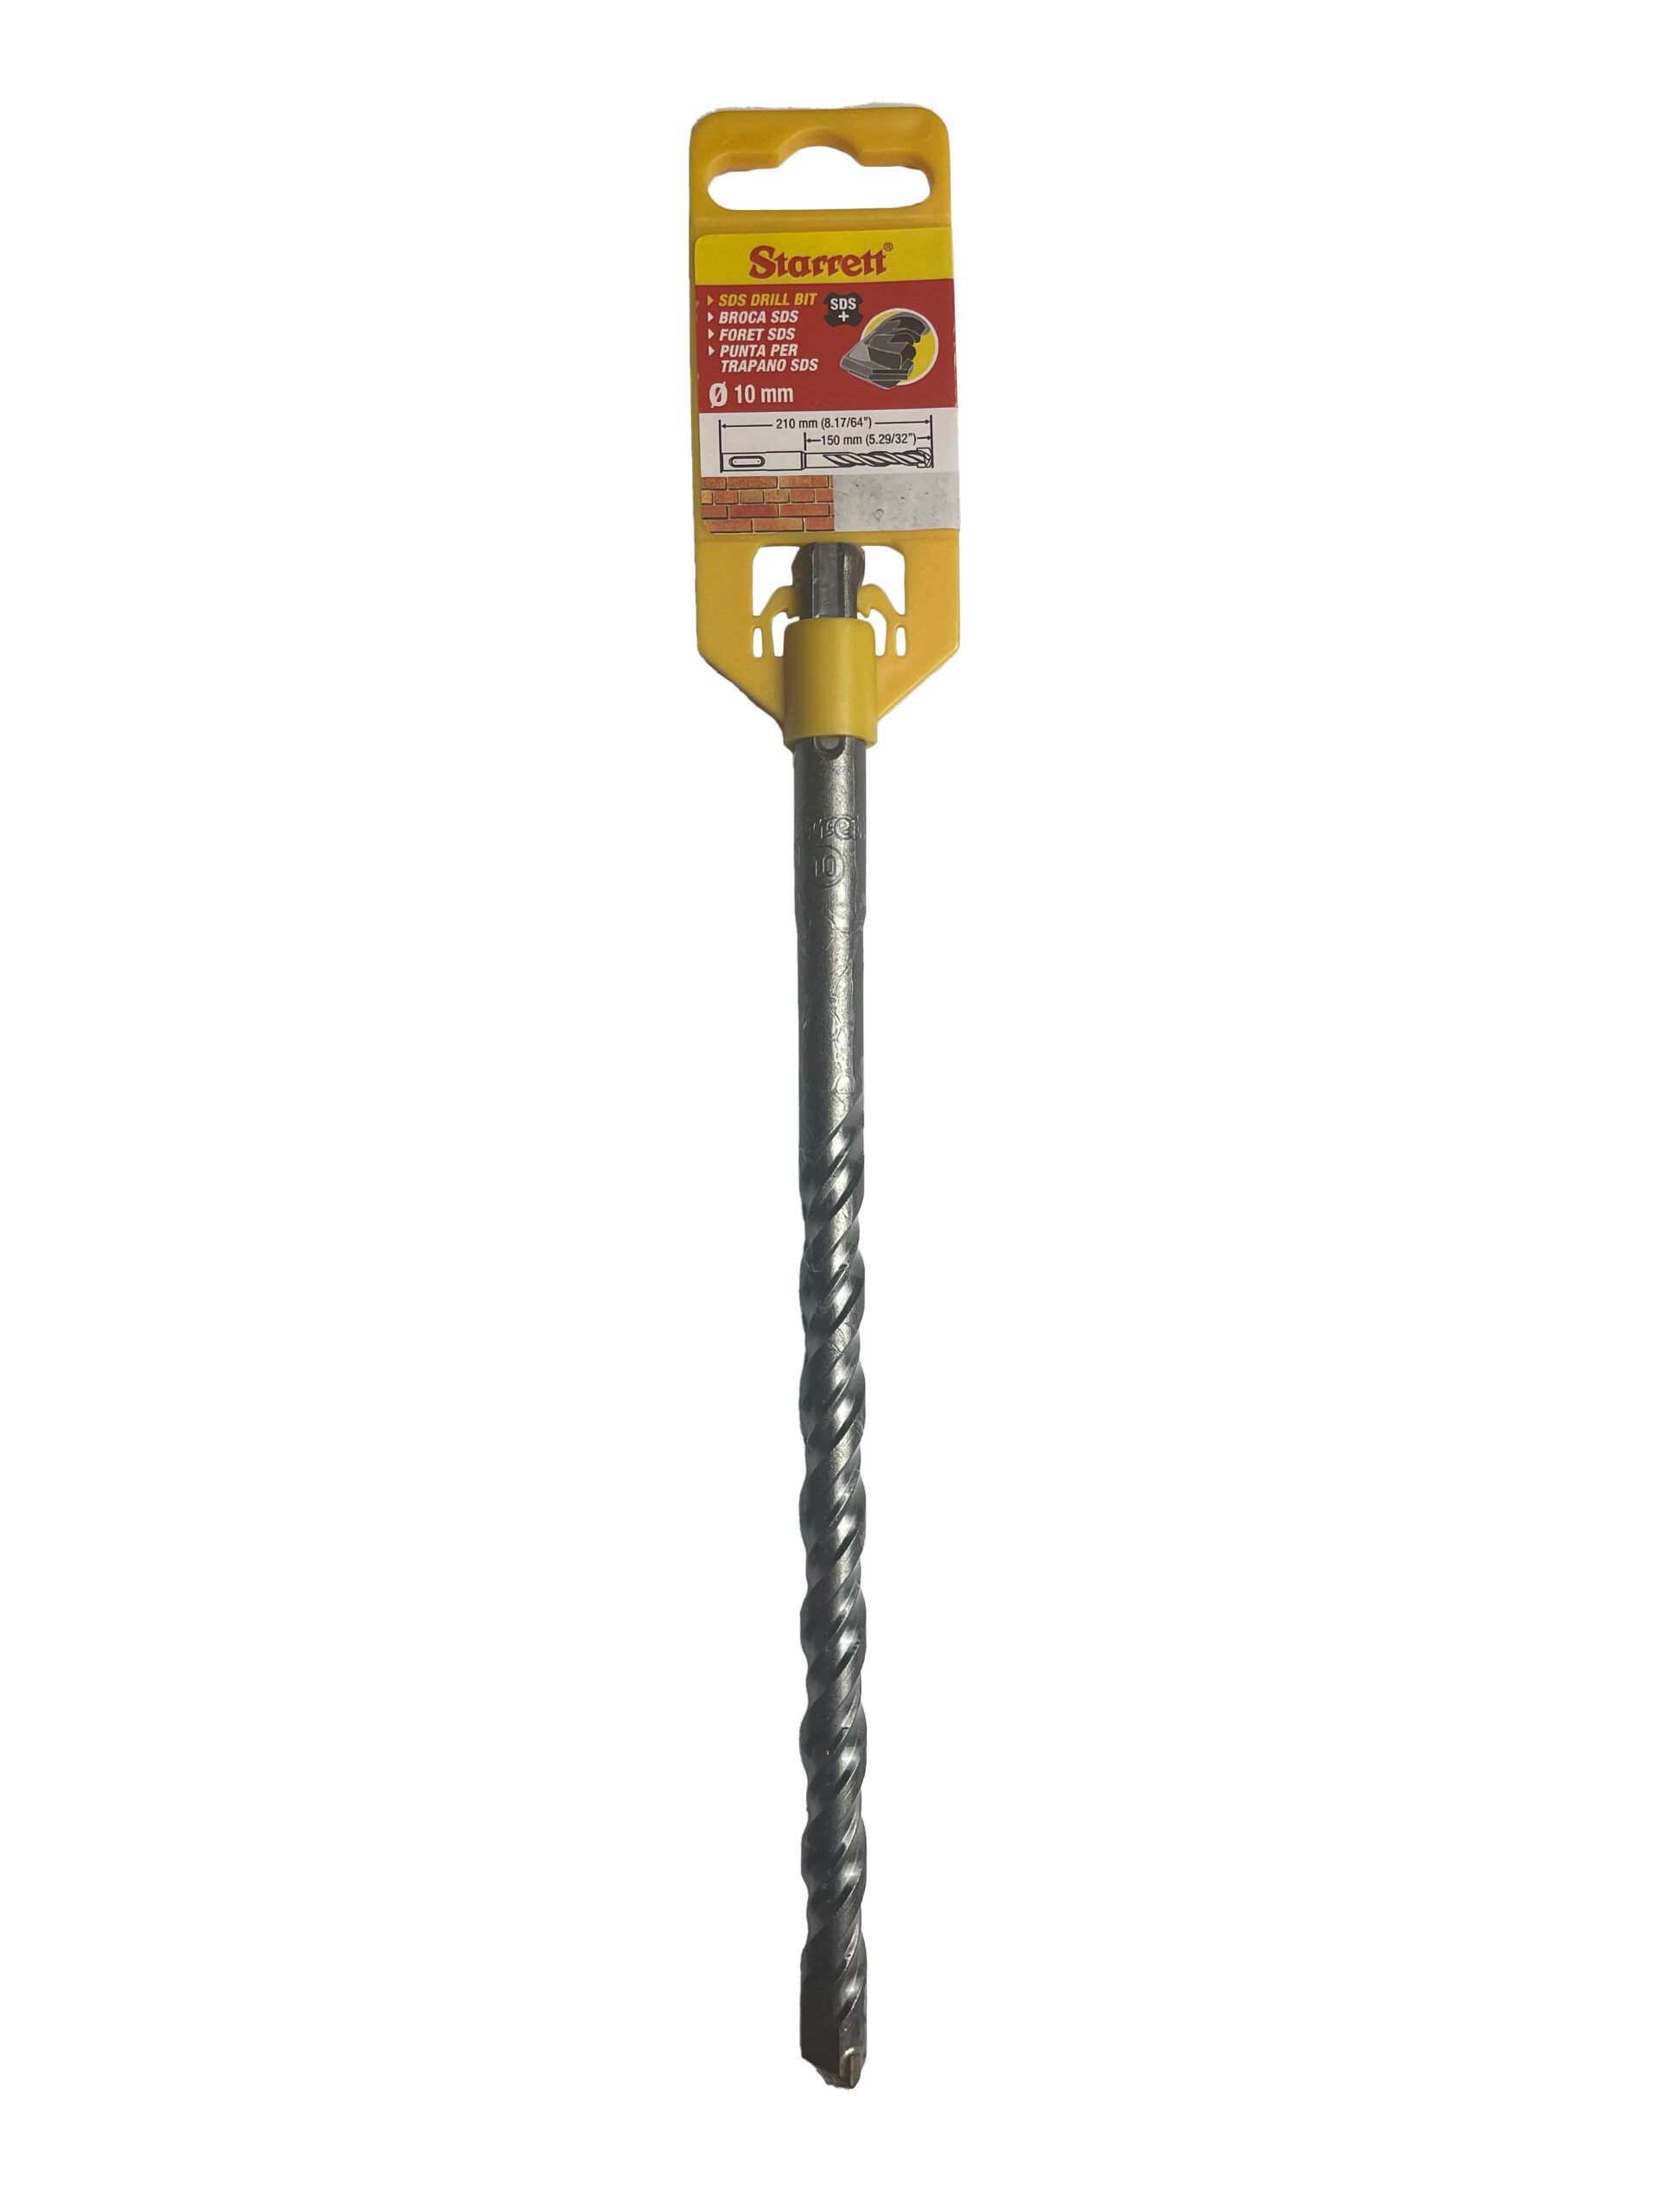 SDS 2 point drill 10mm X 210mm